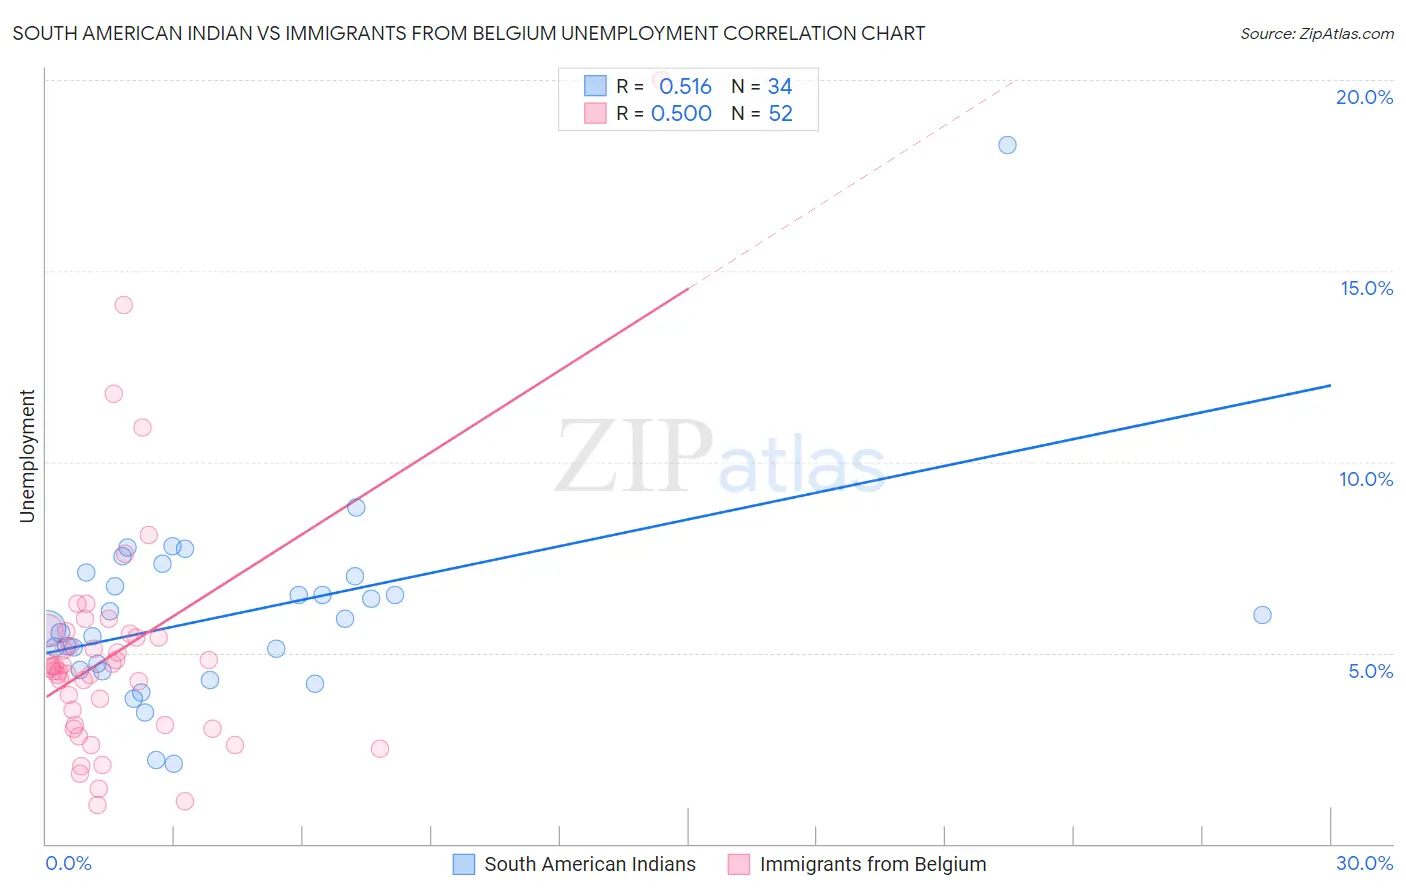 South American Indian vs Immigrants from Belgium Unemployment